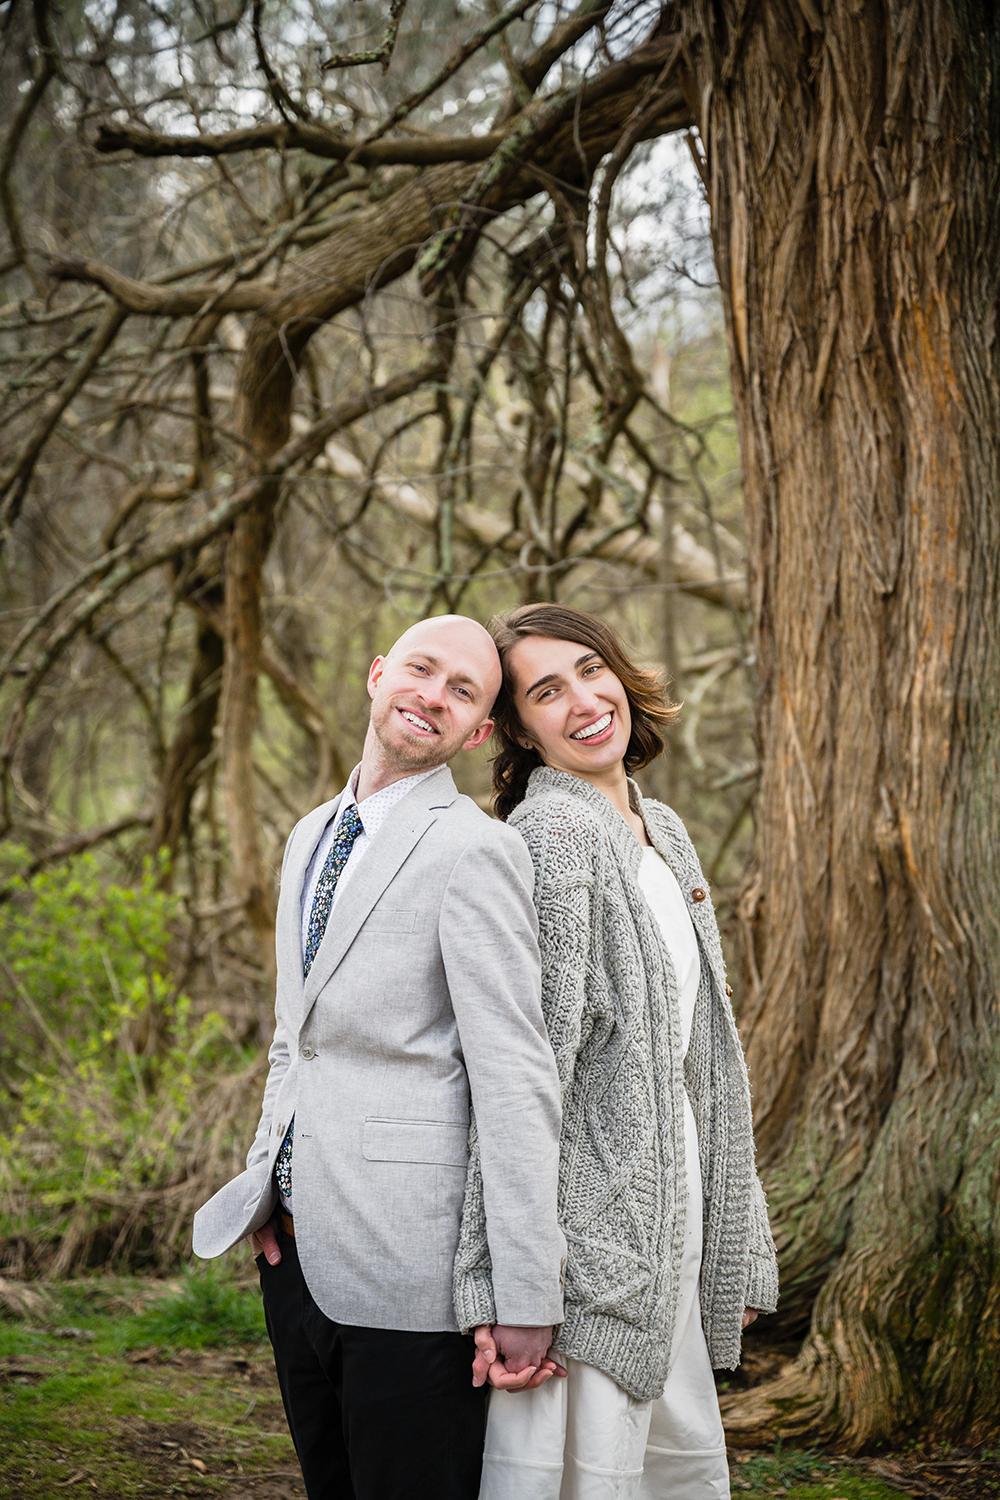 A couple hold hands in front of a tree with lots of branches and smile for a photo.